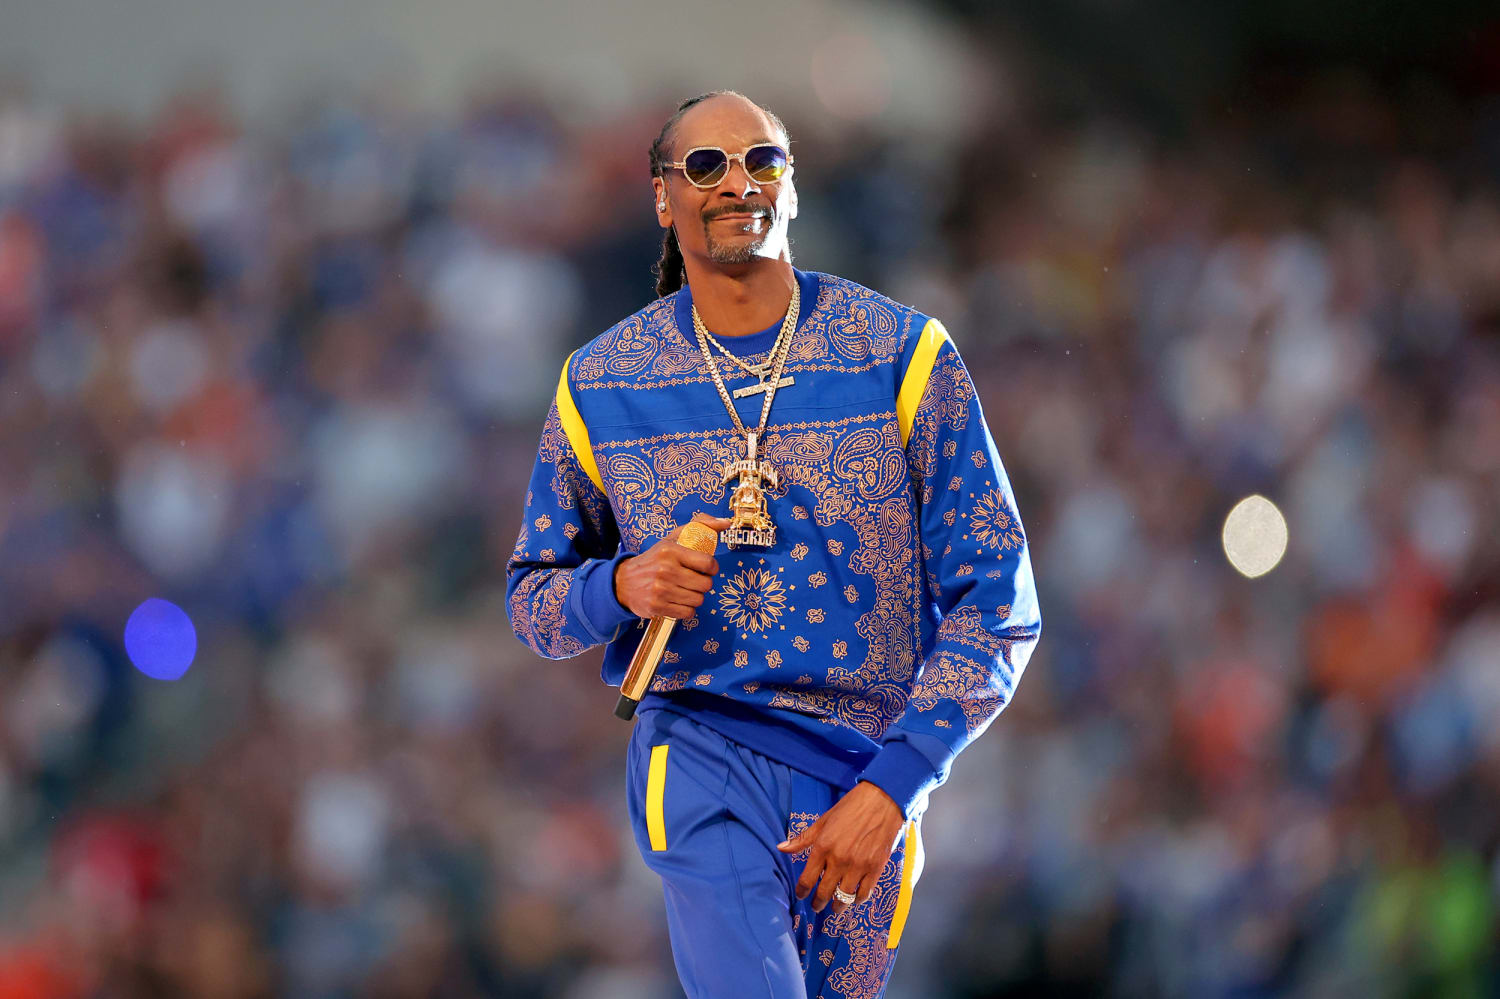 Snoop Dogg debuts children's animated series on YouTube